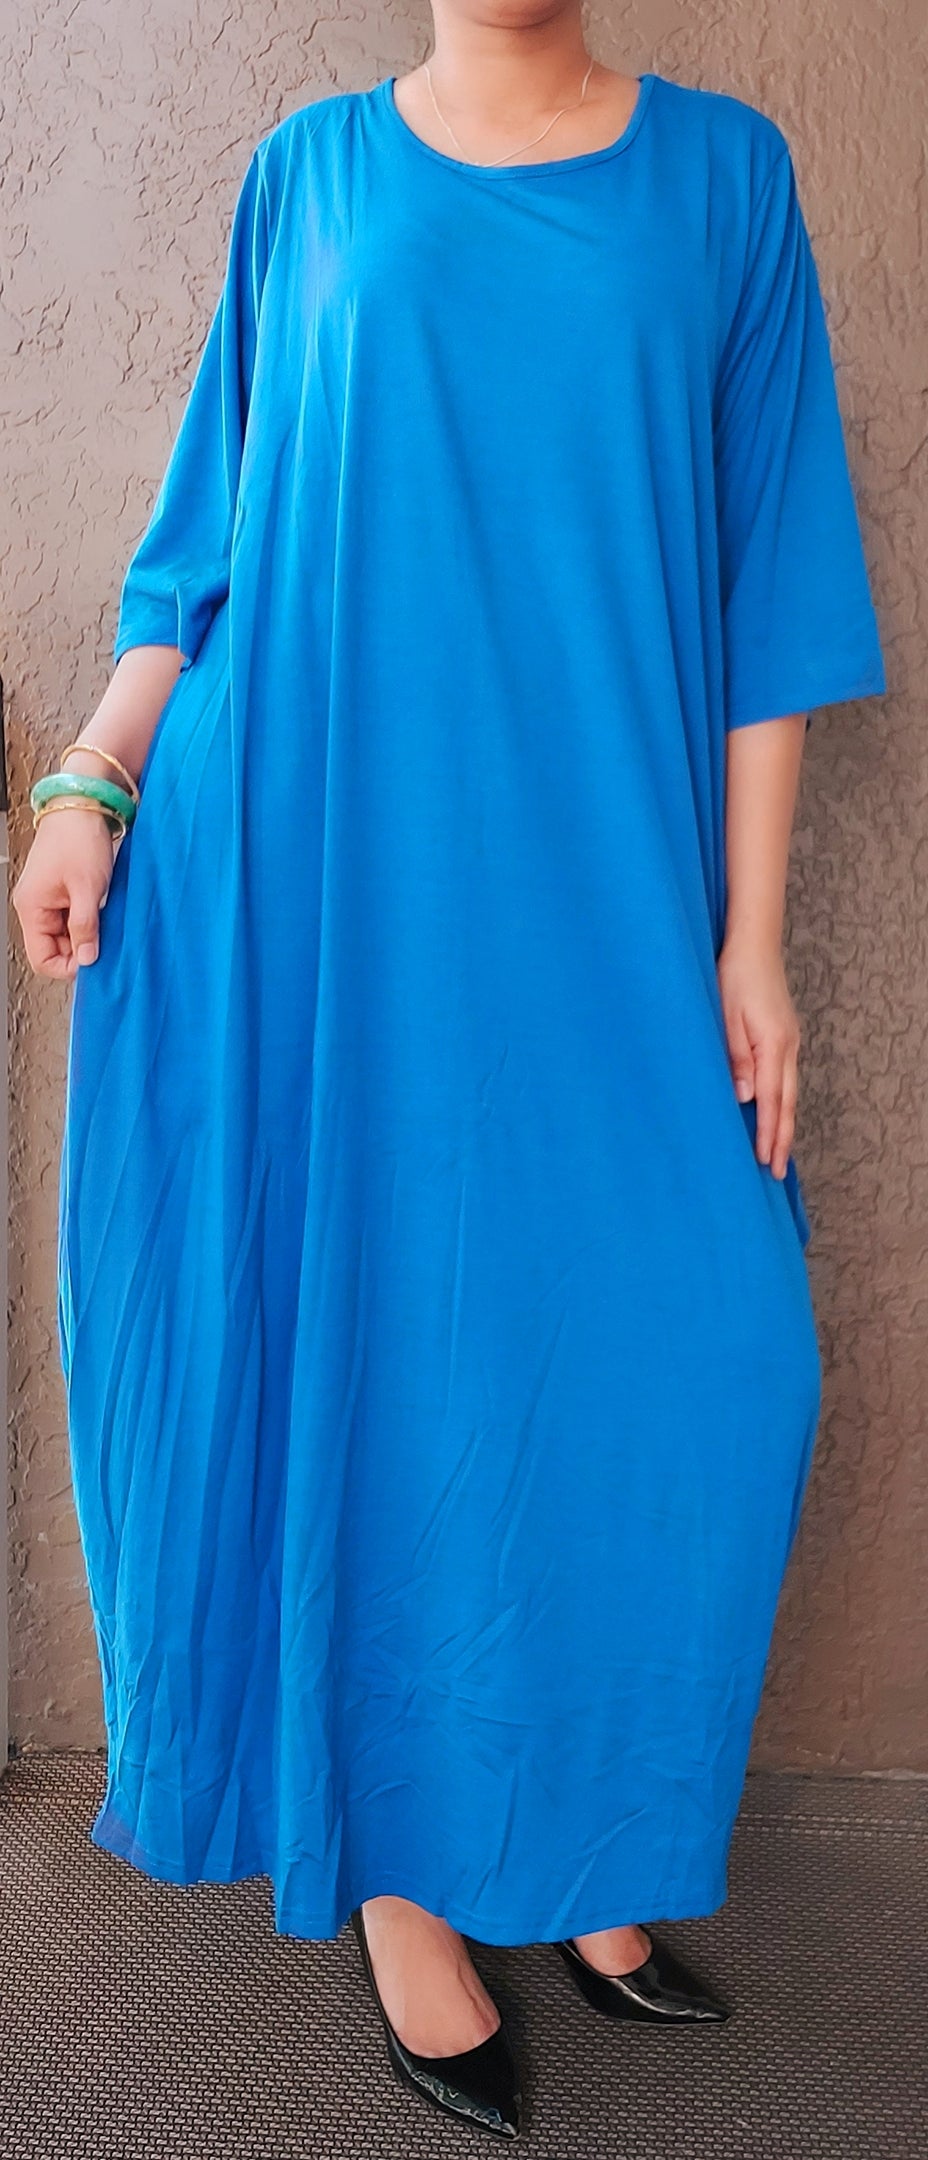 Bubble Dress/ Mid length Sleeves/Solid/ Royal Blue -161